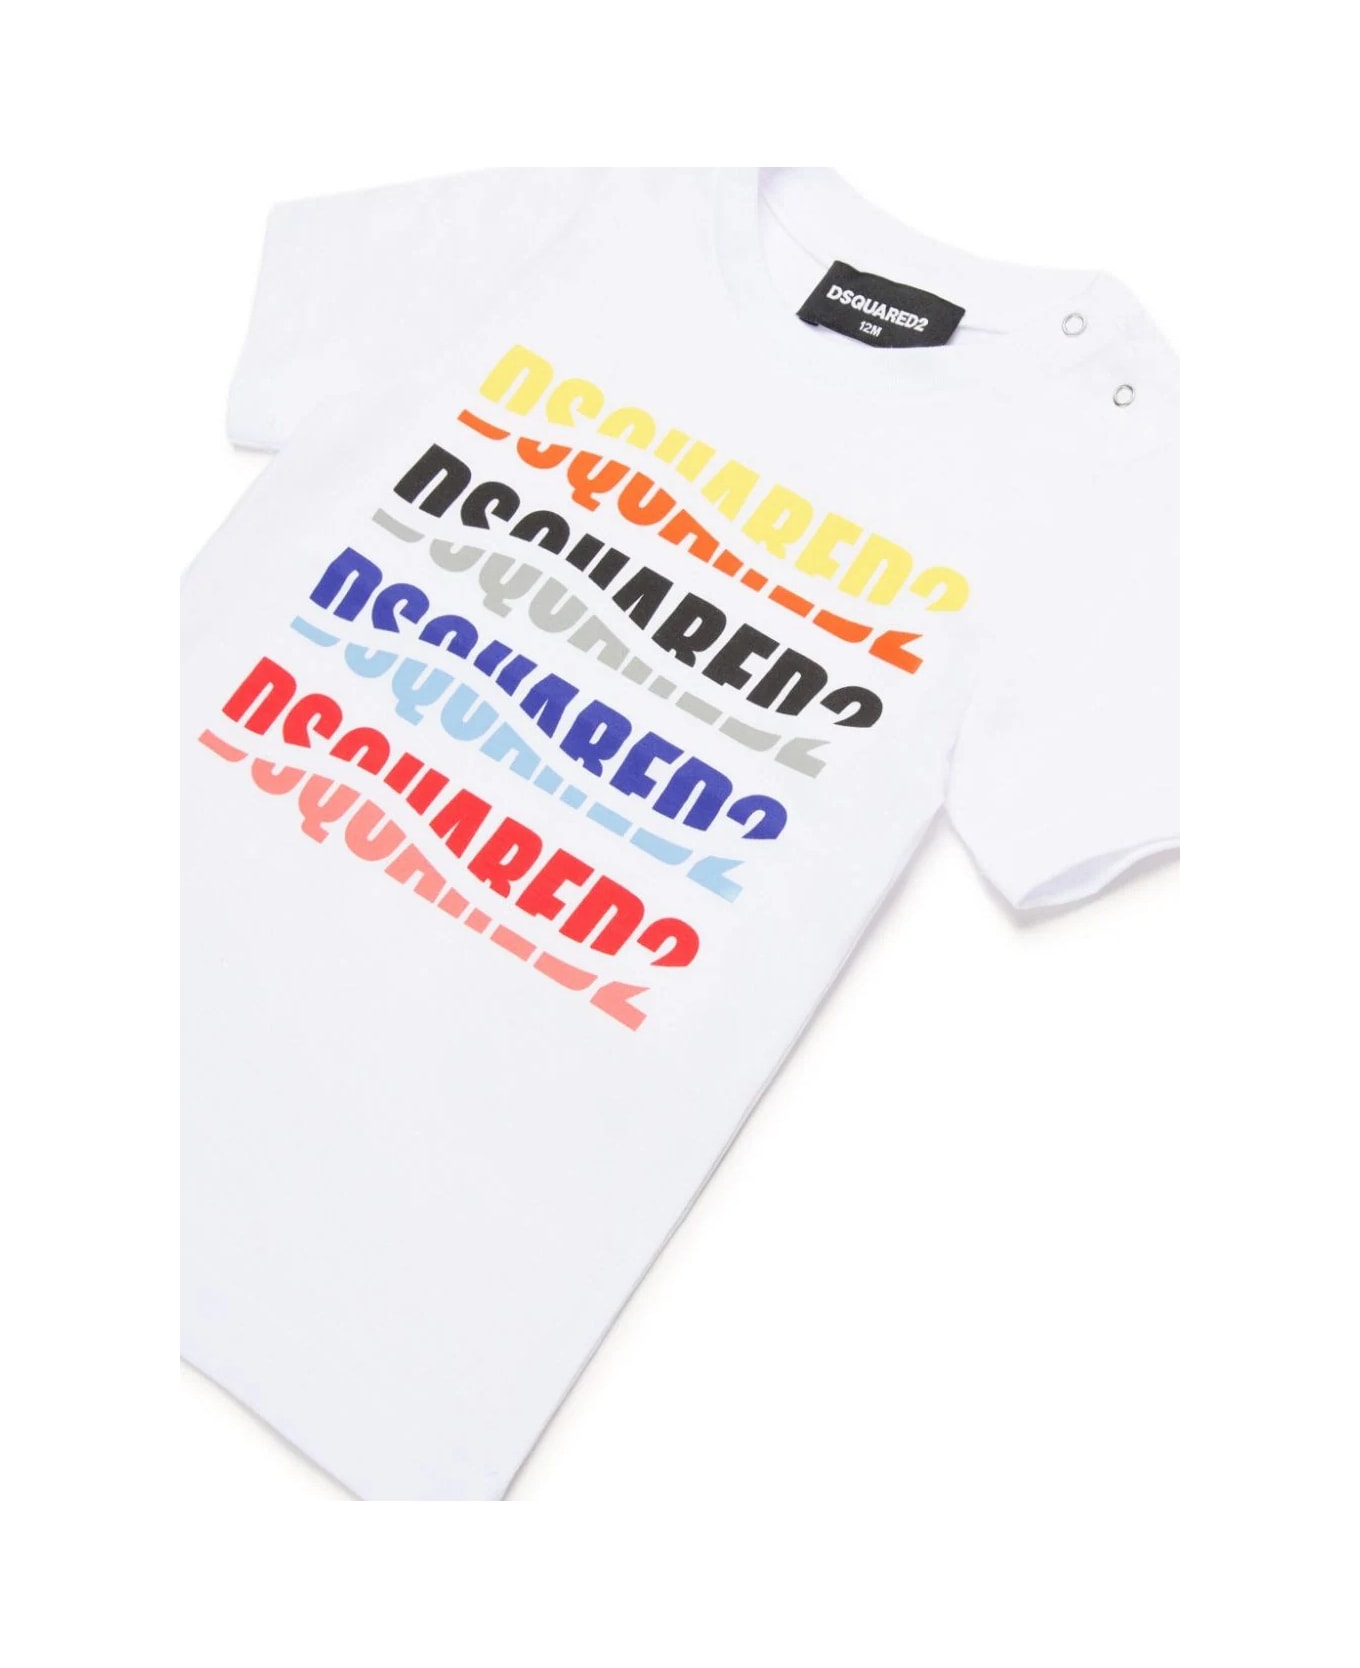 Dsquared2 White T-shirt With Wave Effect Logo Print - White